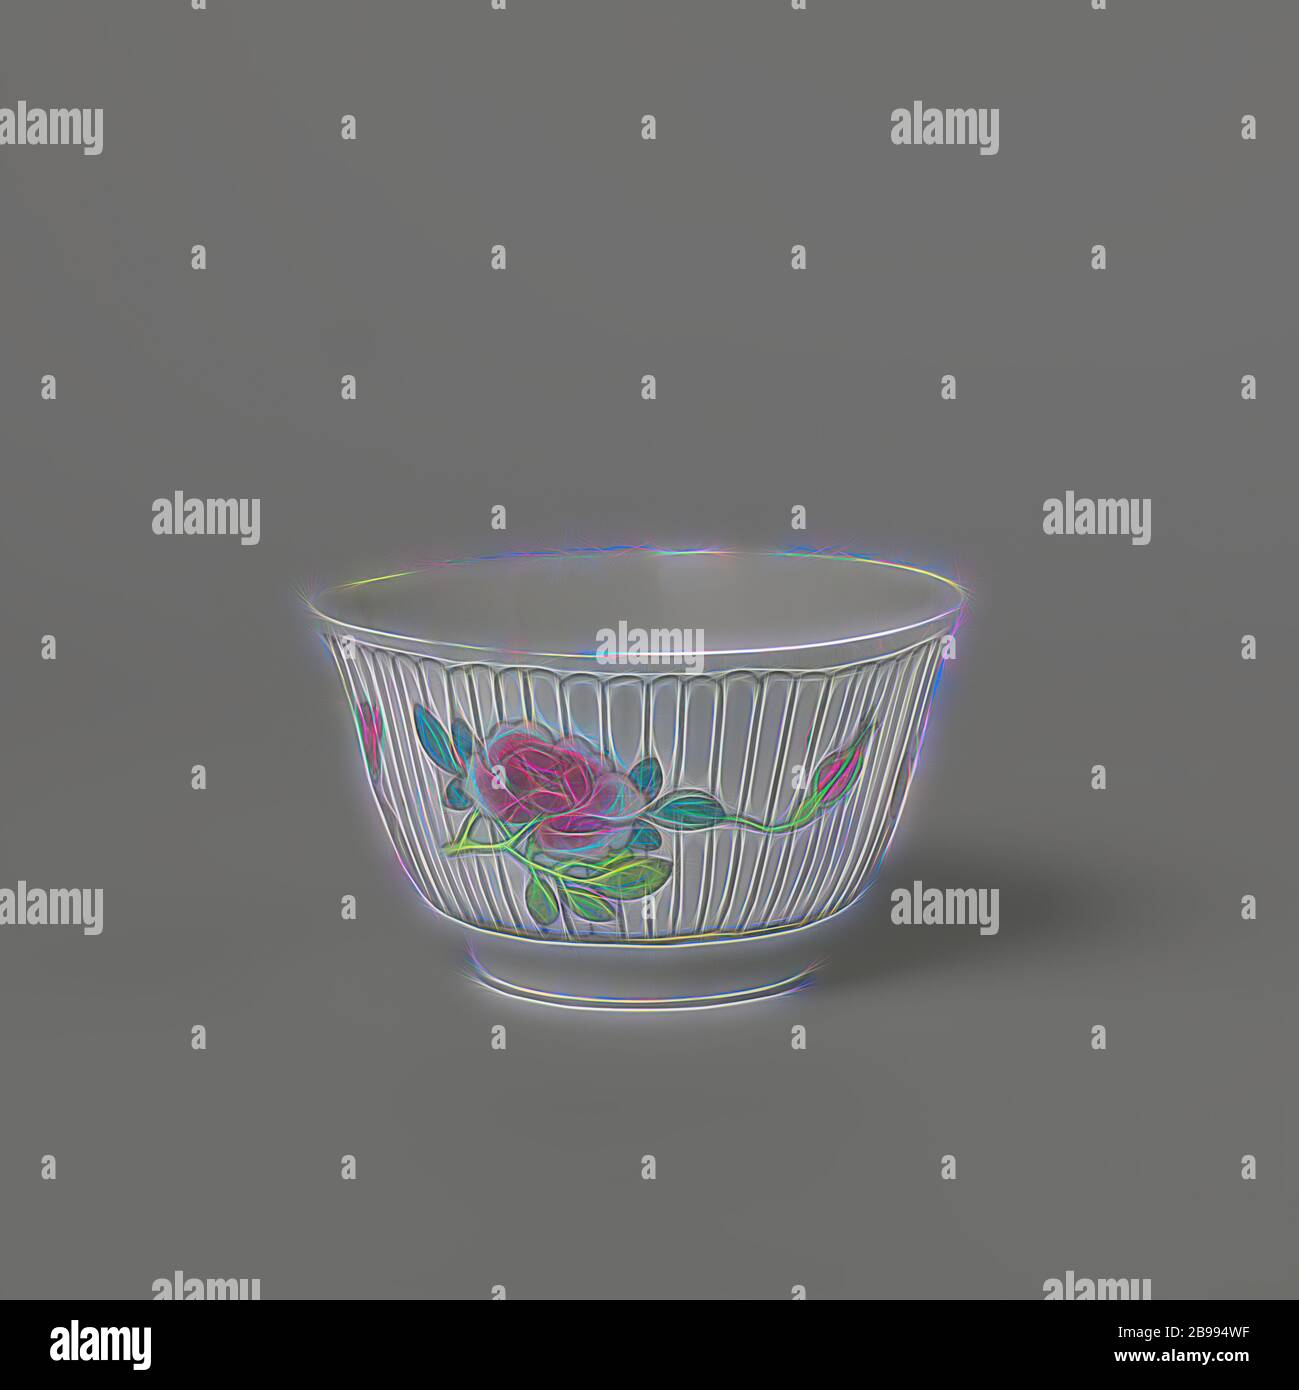 Bell-shaped cup with three flower sprays on a vertically striped ground, Bell-shaped porcelain cup painted on the glaze in blue, red, pink, green, yellow, black and gold. On the outside, three flower branches (peony, magnolia, iris) on a vertically striped ground, a stylized flower on the bottom. Famille rose., anonymous, China, c. 1725 - c. 1749, Qing-dynasty (1644-1912) / Yongzheng-period (1723-1735) / Qianlong-period (1736-1795), porcelain (material), glaze, gold (metal), vitrification, h 3.8 cm d 6.7 cm d 3.4 cm, Reimagined by Gibon, design of warm cheerful glowing of brightness and light Stock Photo